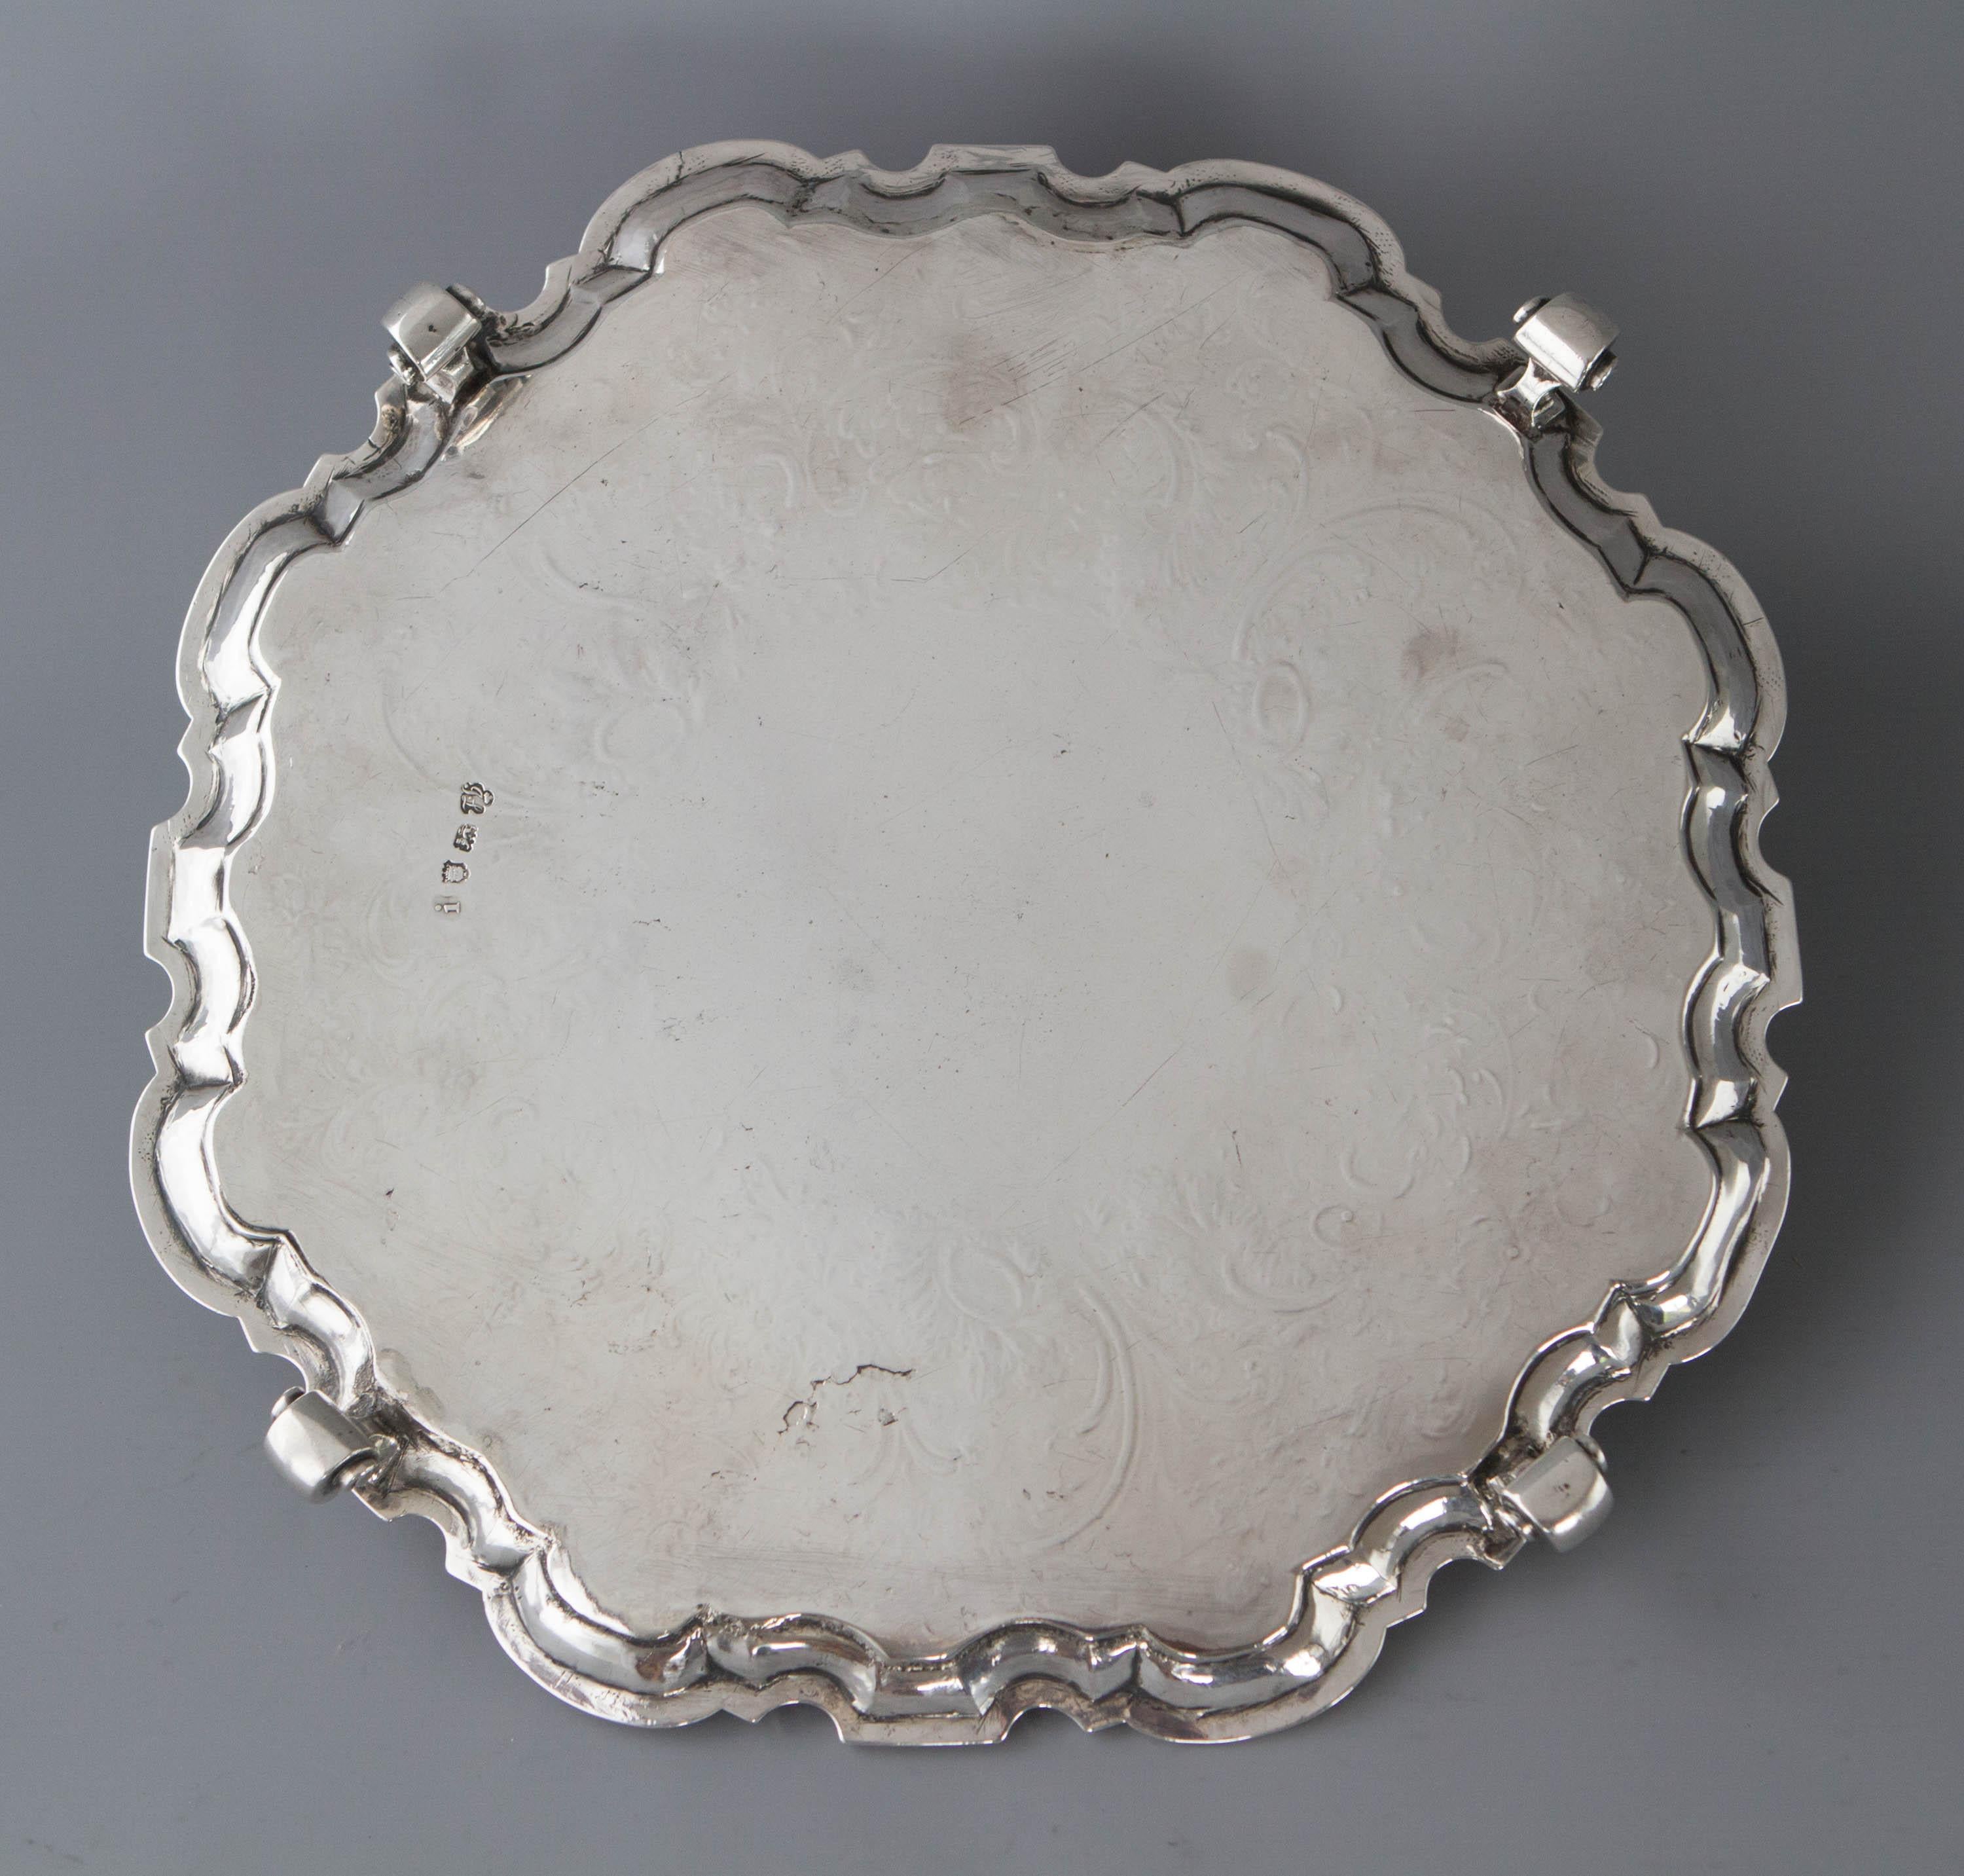 A superb George II silver salver of octagonal form with scrolling pattern rim and the whole resting on four scroll feet. The centre engraved with the Cockburn Armorial above 'Vigilans et Audax' meaning 'Vigilant and Bold', surmounted by the Cockburn